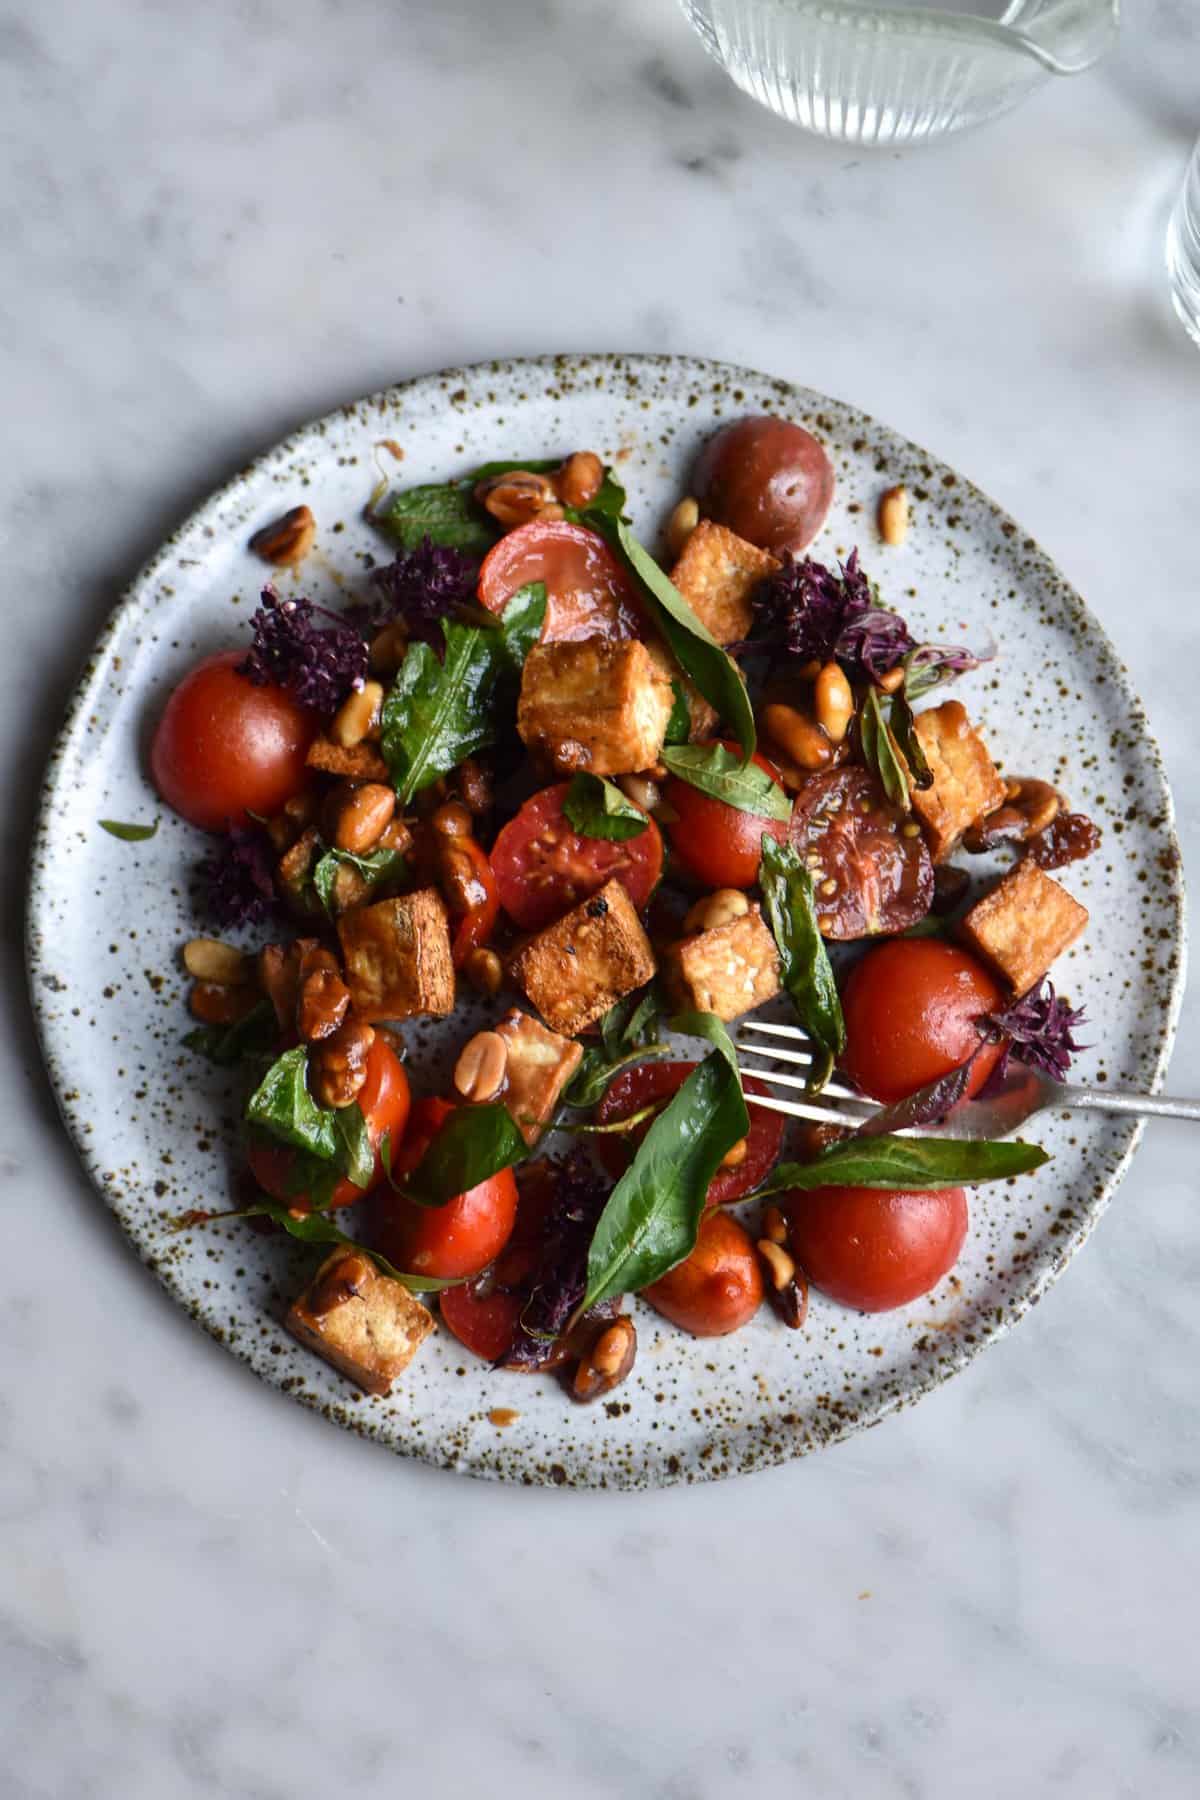 A salt and pepper tofu salad with tomatoes, herbs and a tamarind makrut lime dressing. Plated on a white ceramic plate against a white marble table